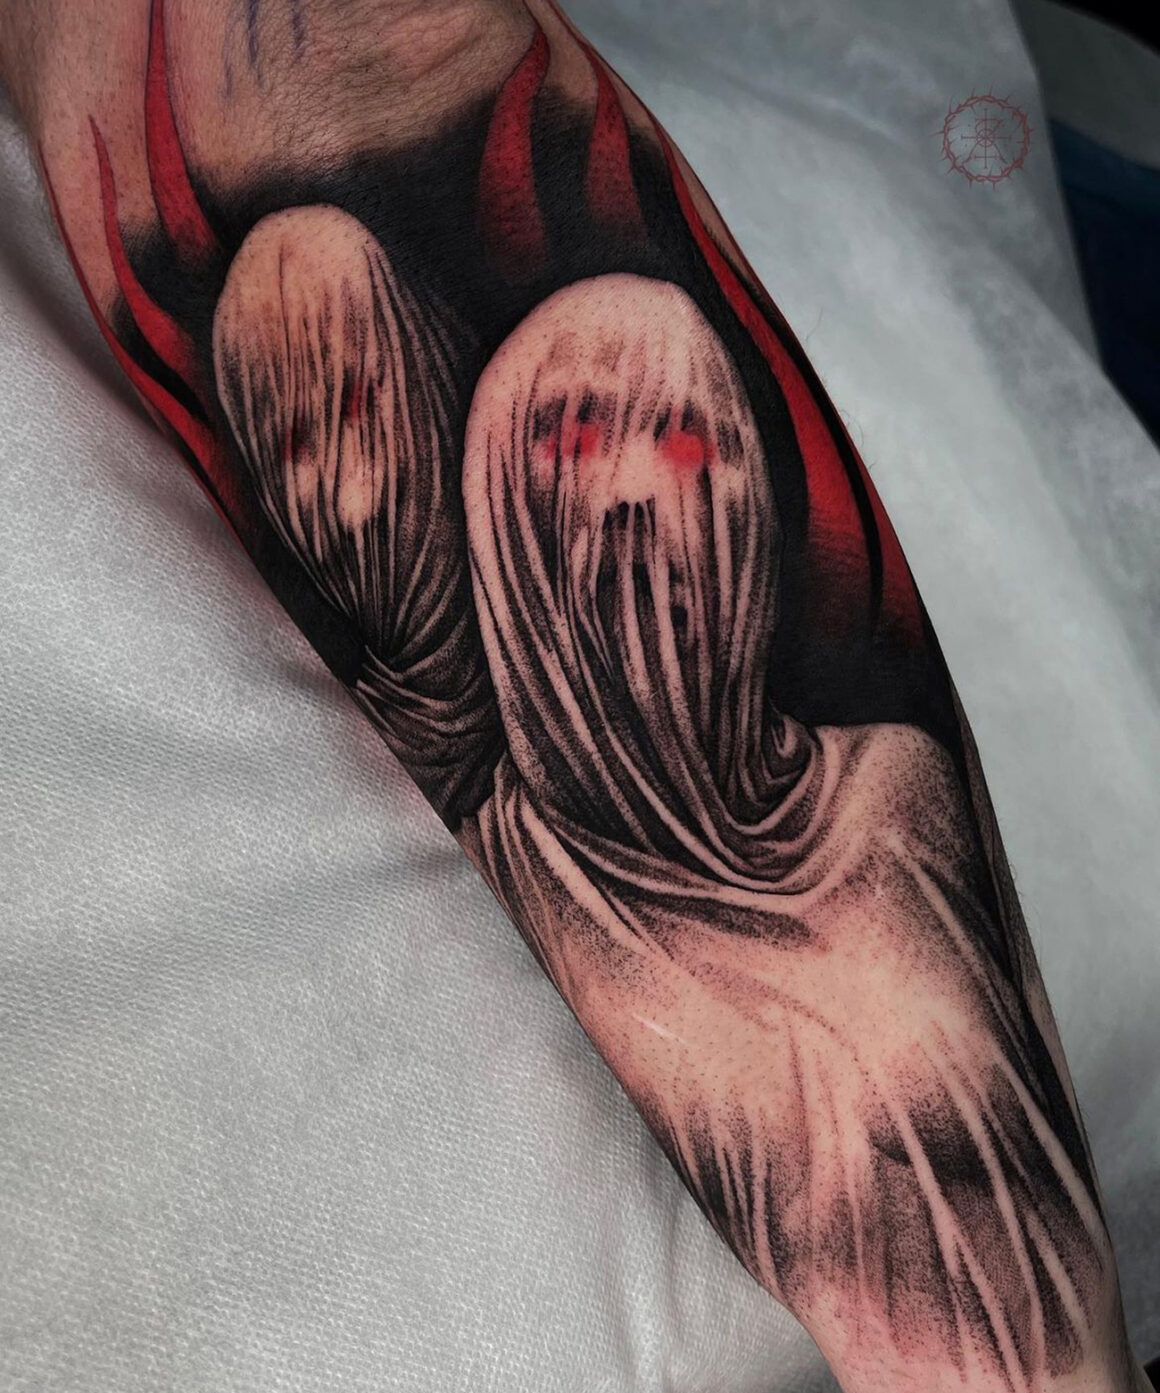 Tattoo by Robert Borbas, @grindesign